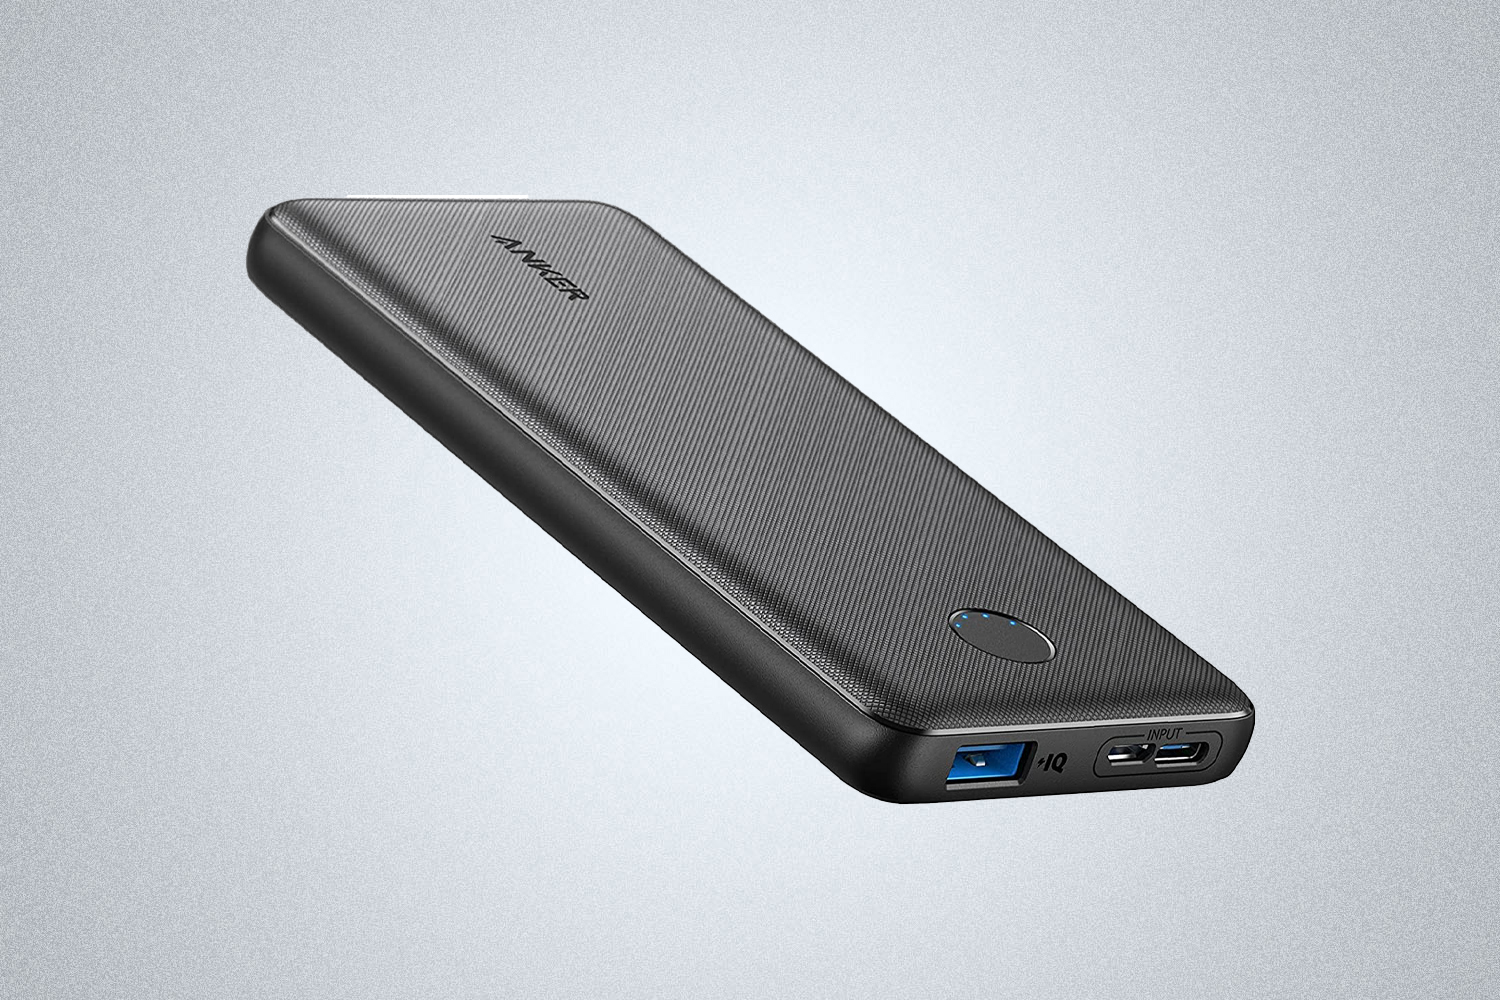 The Anker PowerCore Slim is the best charger for flights